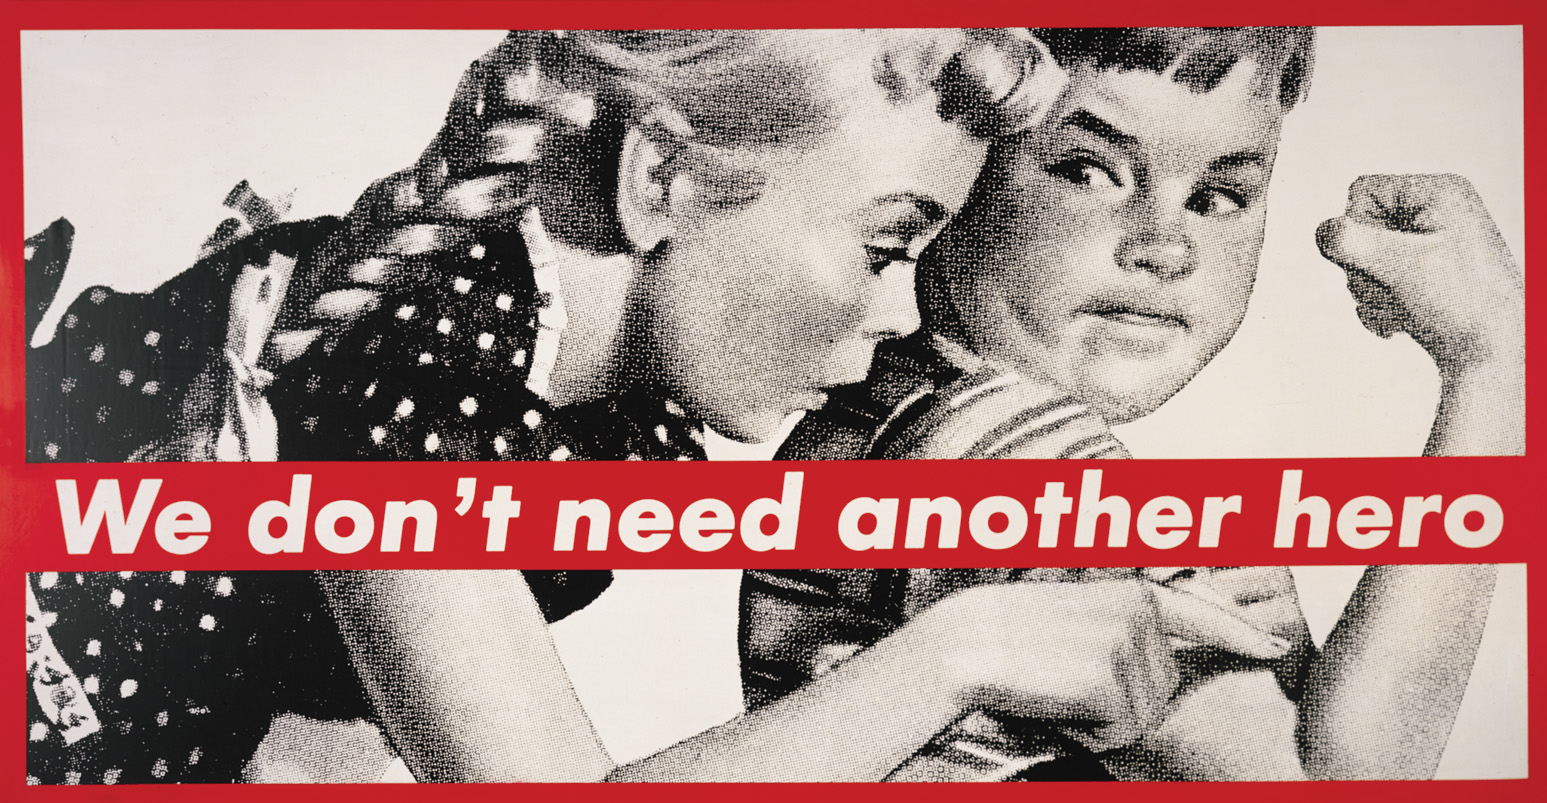 Barbara Kruger – Untitled (We don't need another hero)